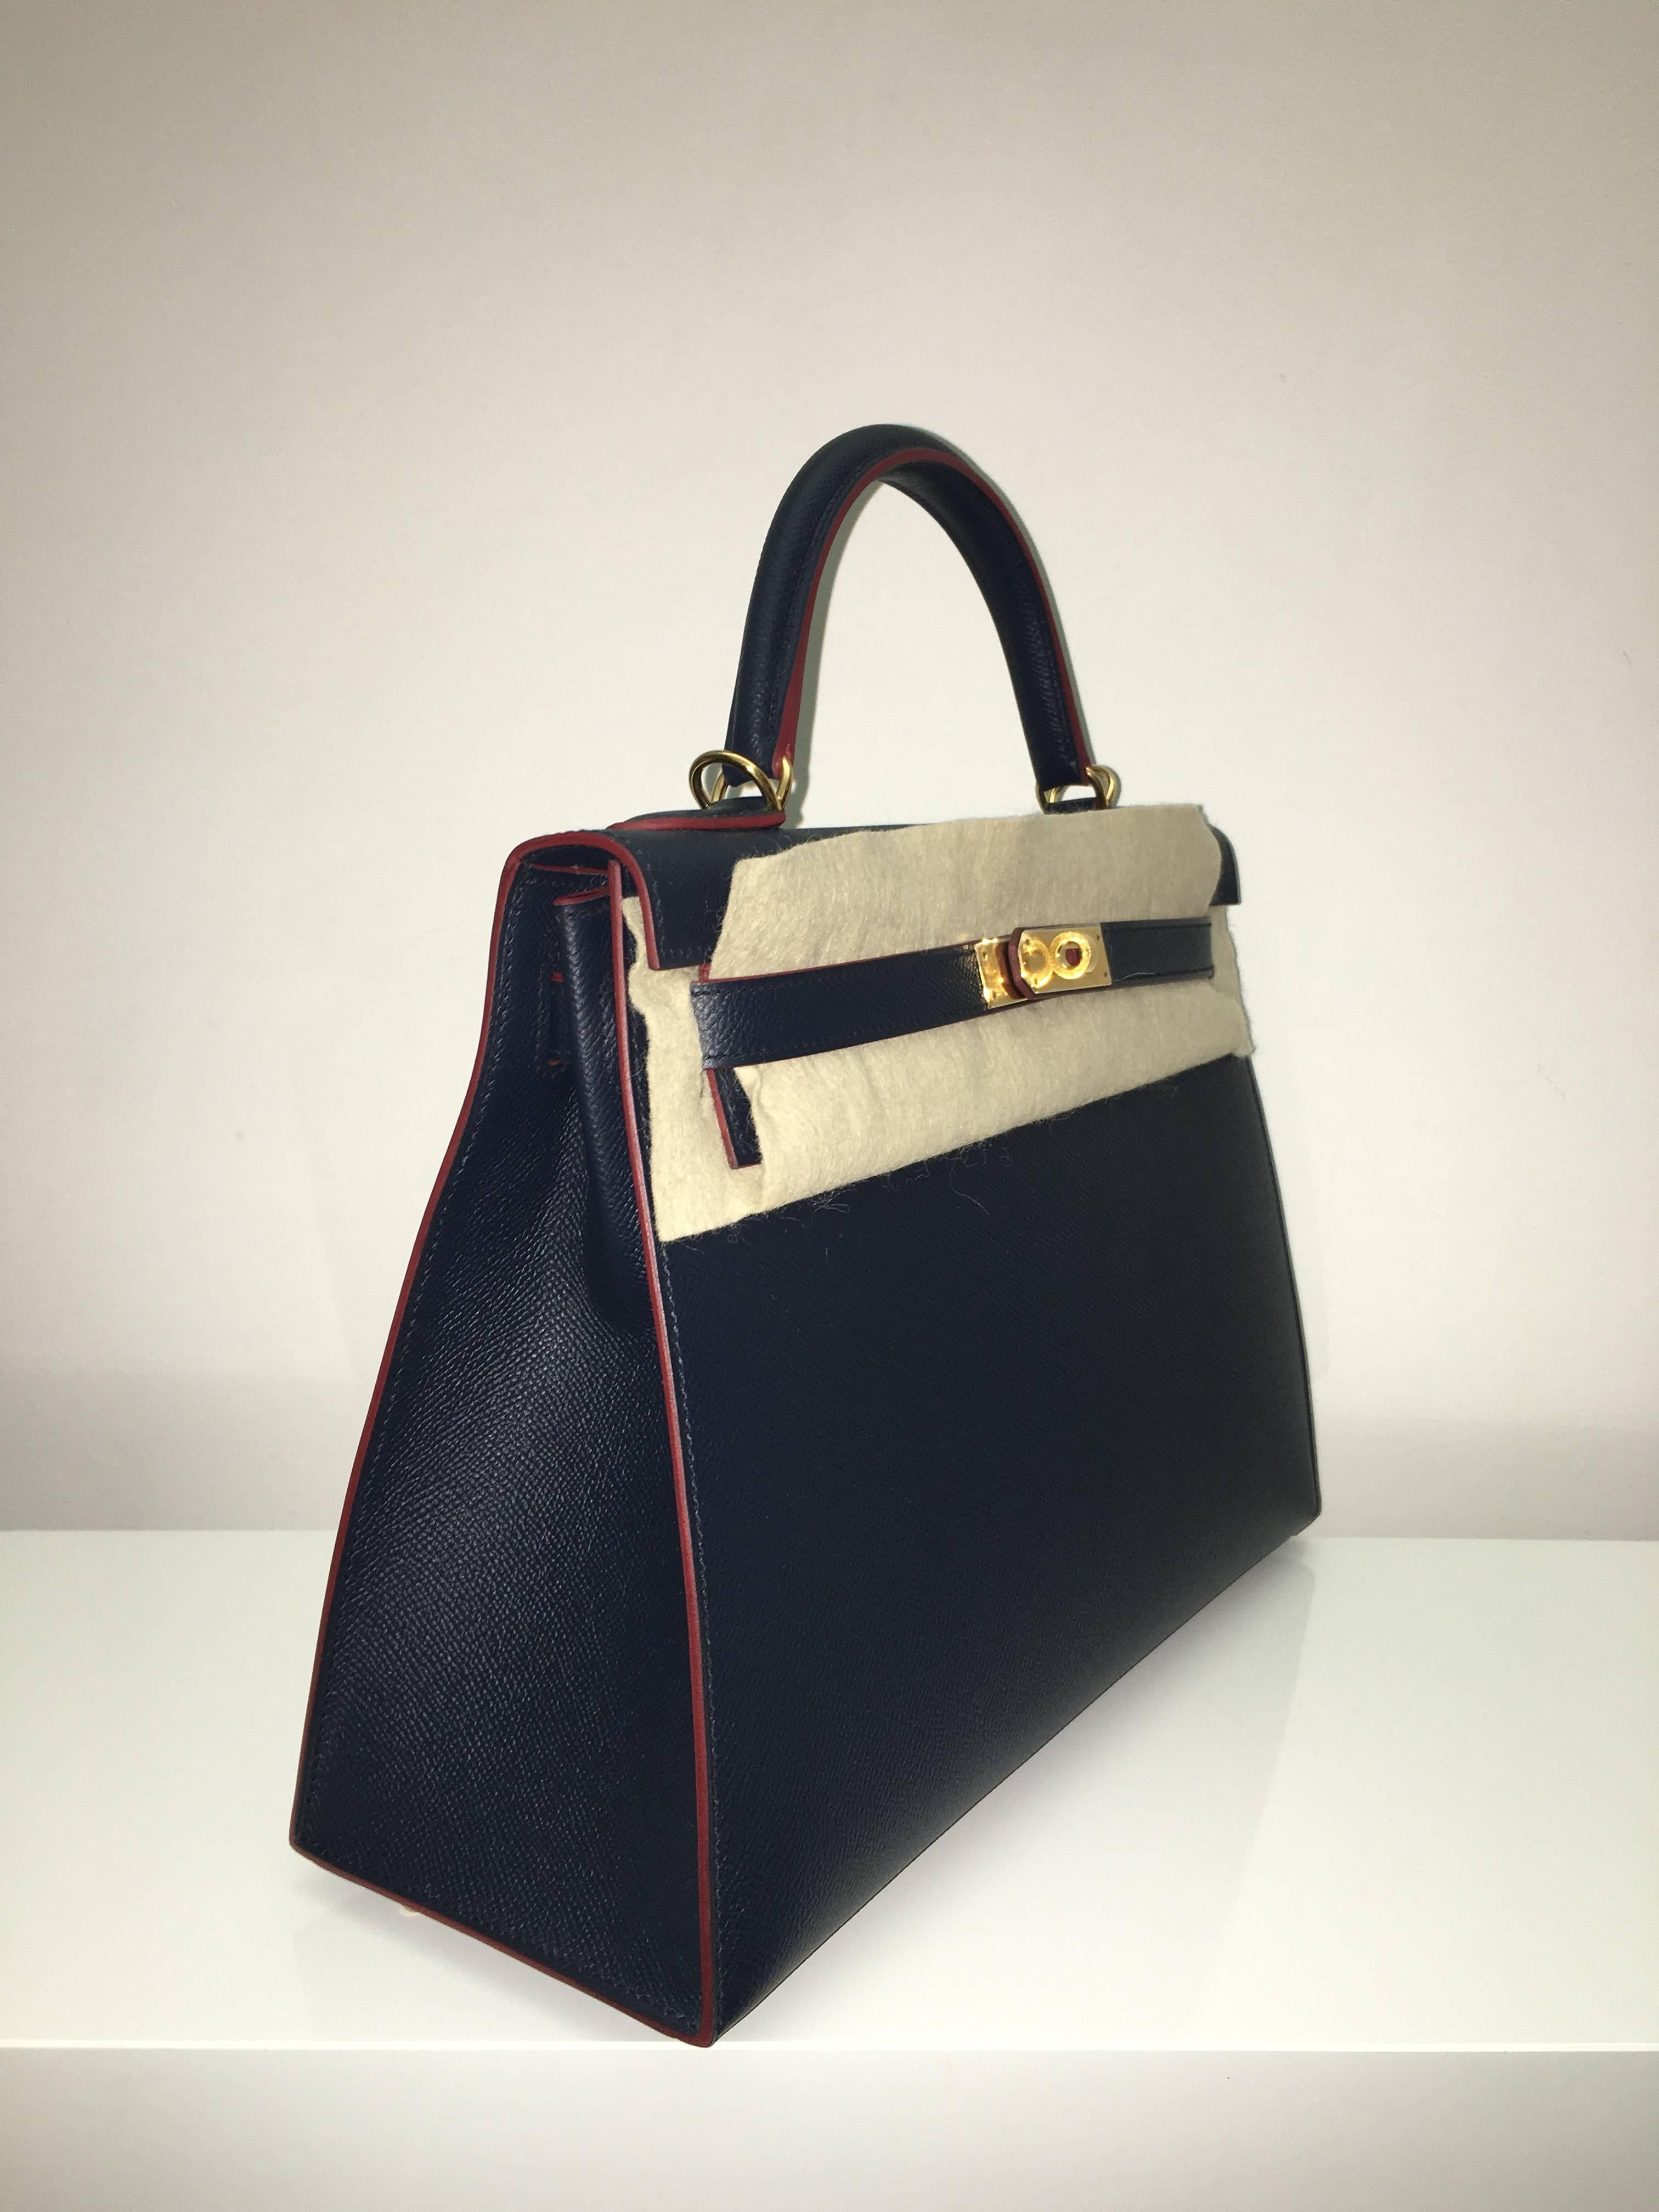 Hermes 
Kelly Size 32
Epsom Leather 
Colour Blue Indigo/Rouge H contour
Gold Hardware 
store fresh, comes with receipt and full set (dust bag, box...) 
Hydeparkfashion specializes in sourcing and delivering authentic luxury handbags, mainly